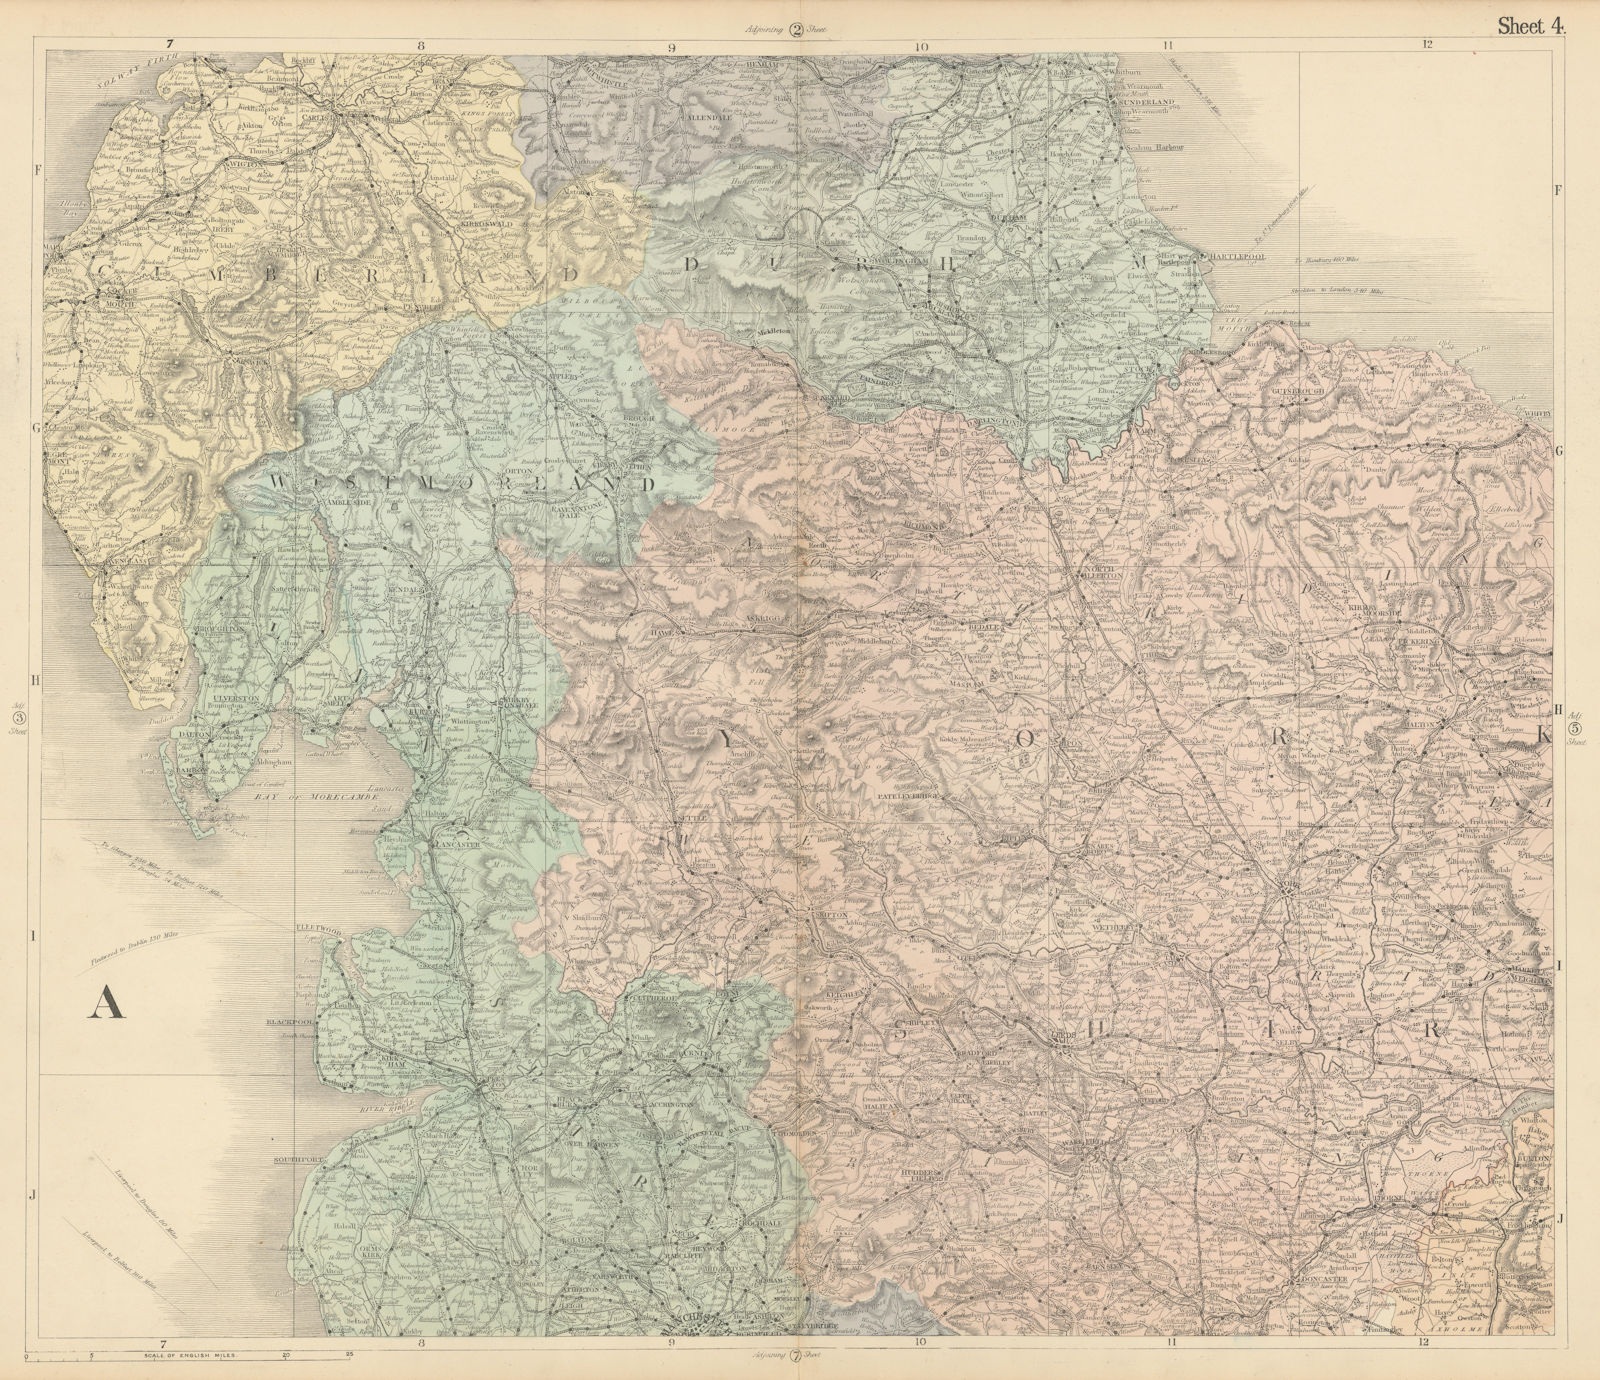 Associate Product Northern England. Lake District Pennines Yorkshire Dales & Moors. BACON 1883 map